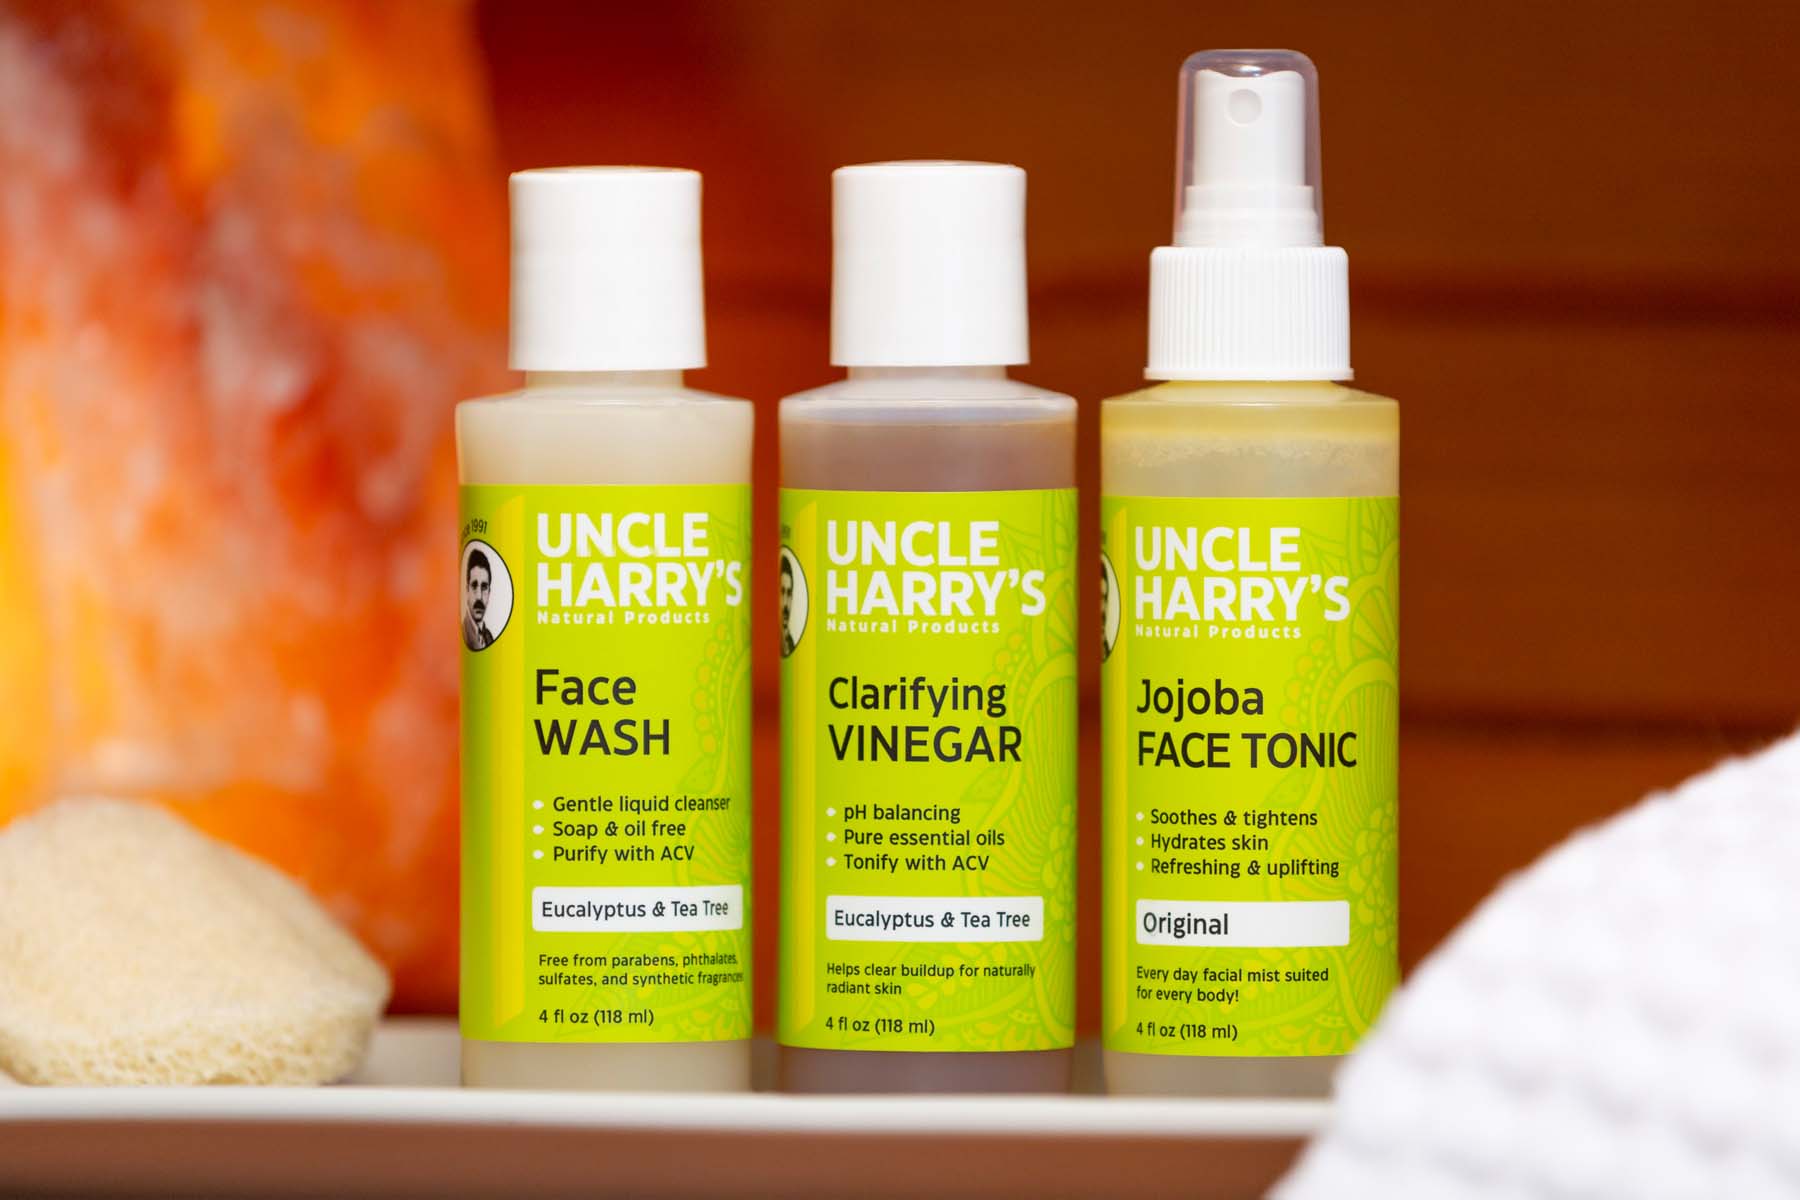 Uncle Harry's Face Wash